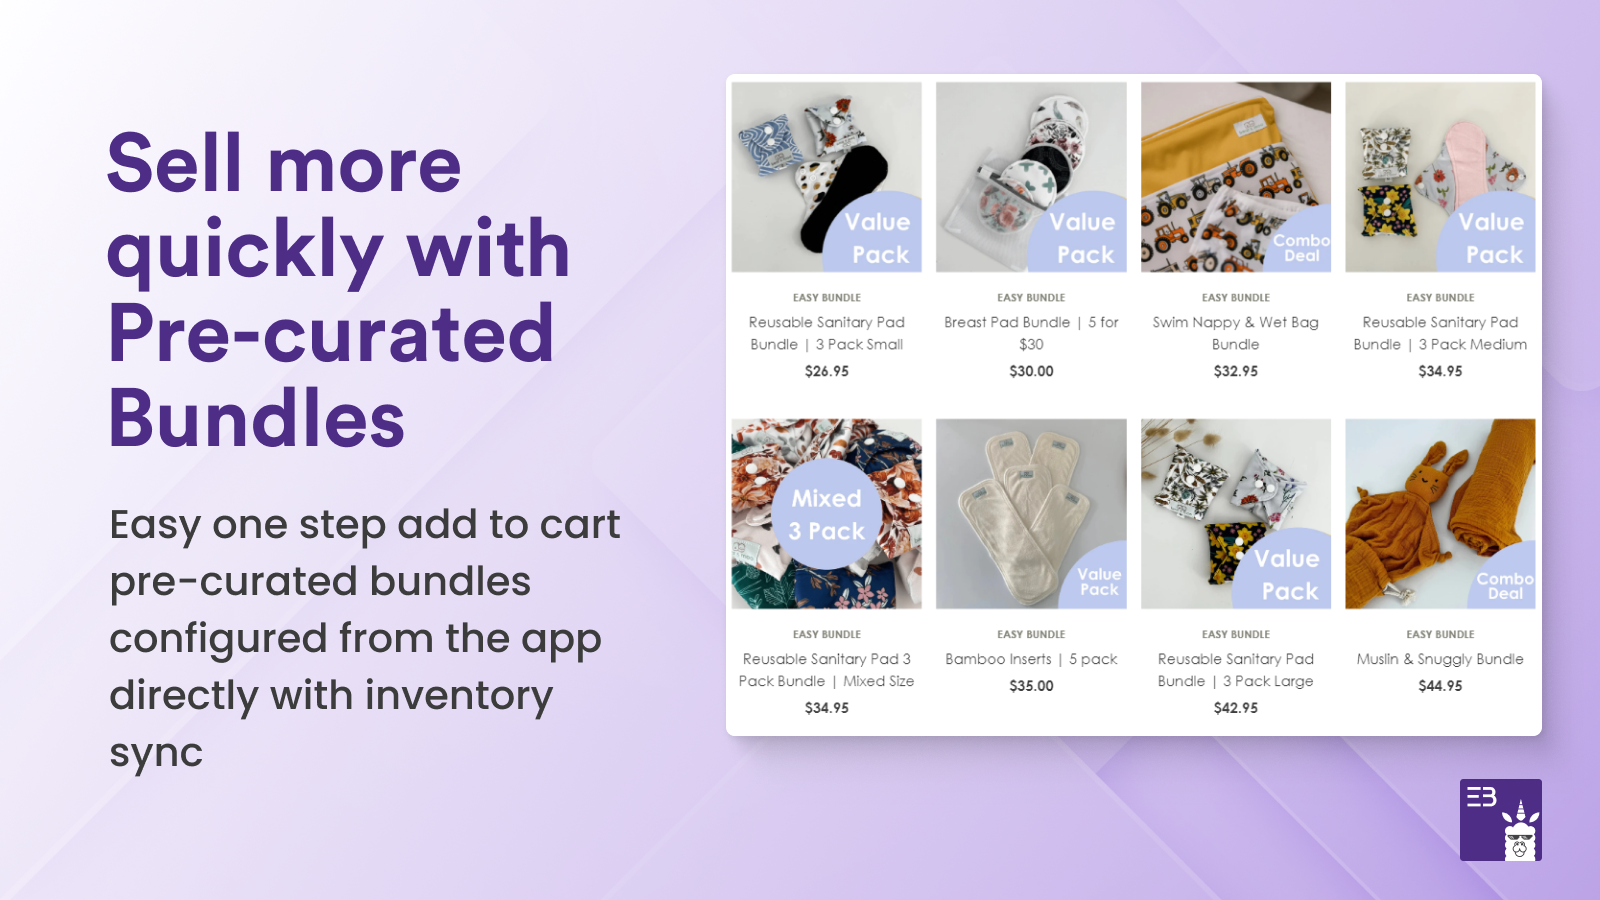 Sell more quickly with Pre-curated Bundles